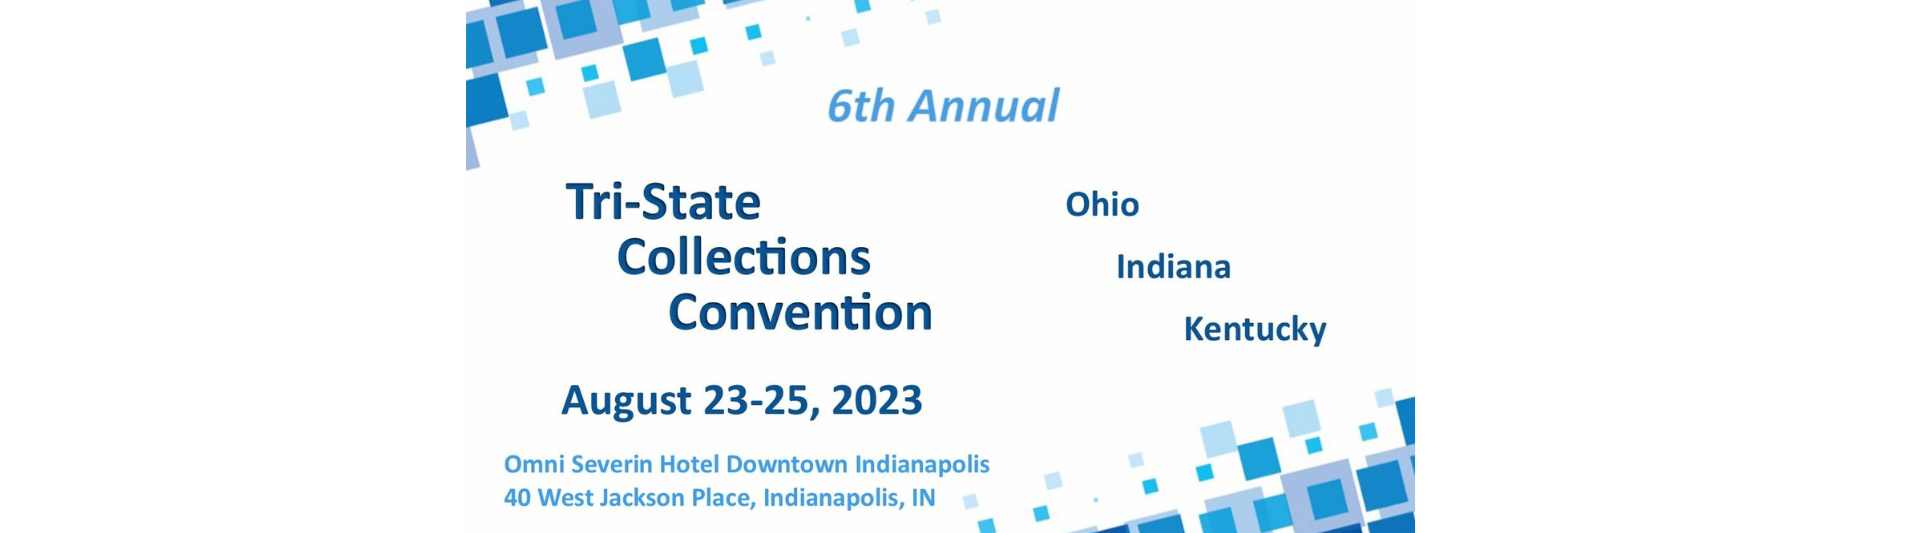 2023 Tri-State Collections Convention